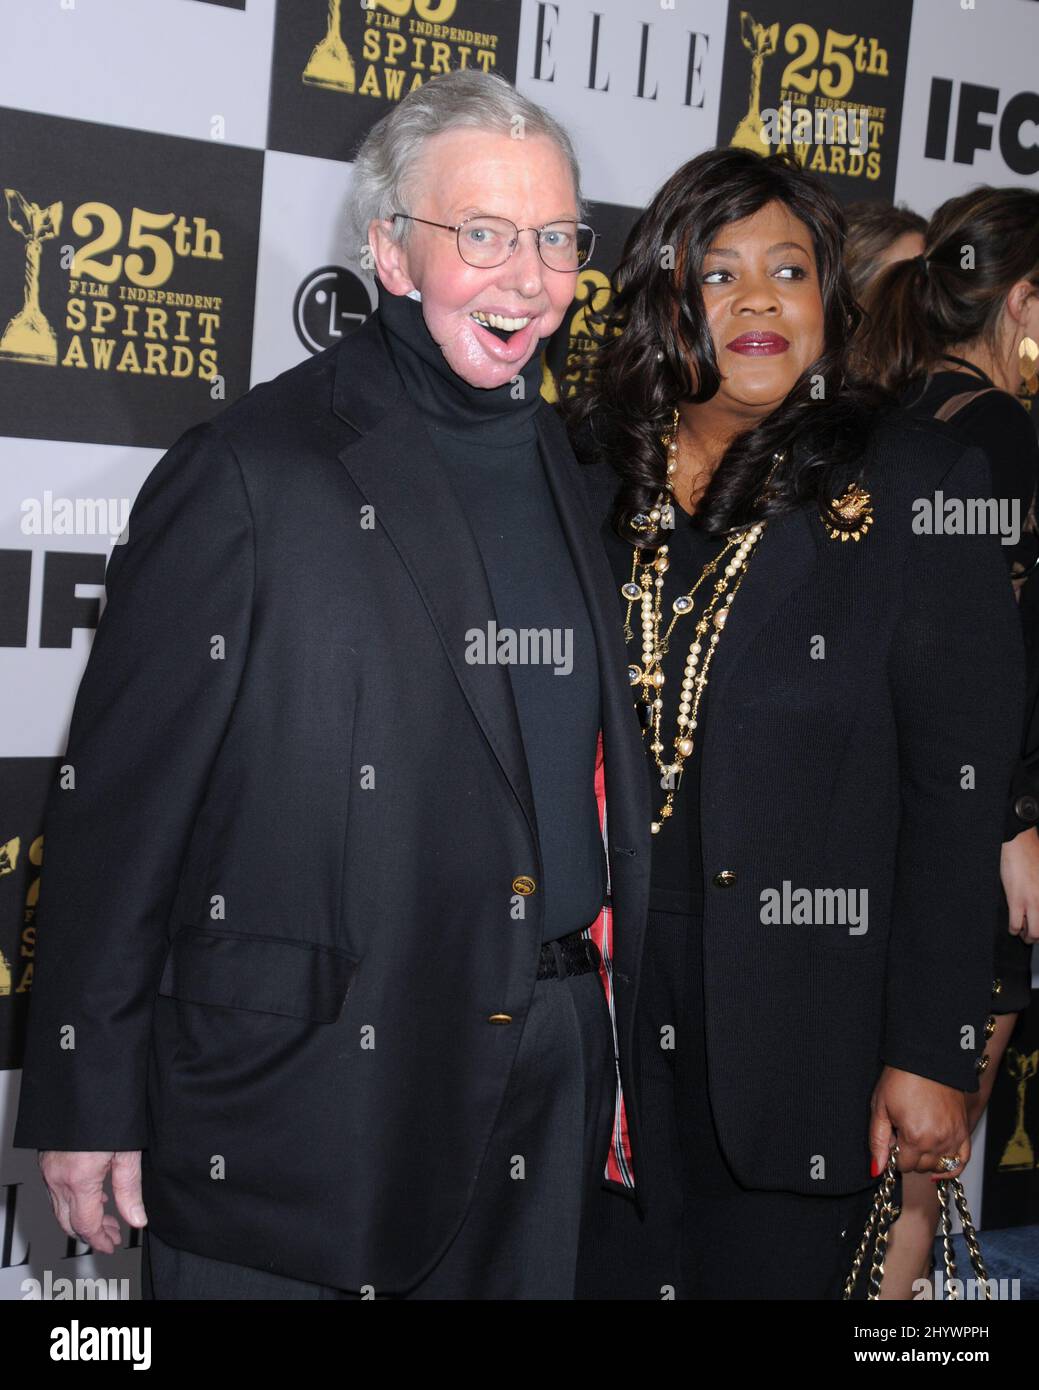 March 5, 2010 Los Angeles, Ca. Roger Ebert and wife Chaz 25th Film Independent Spirit Awards Held at Nokia Theatre L.A. Live Stock Photo